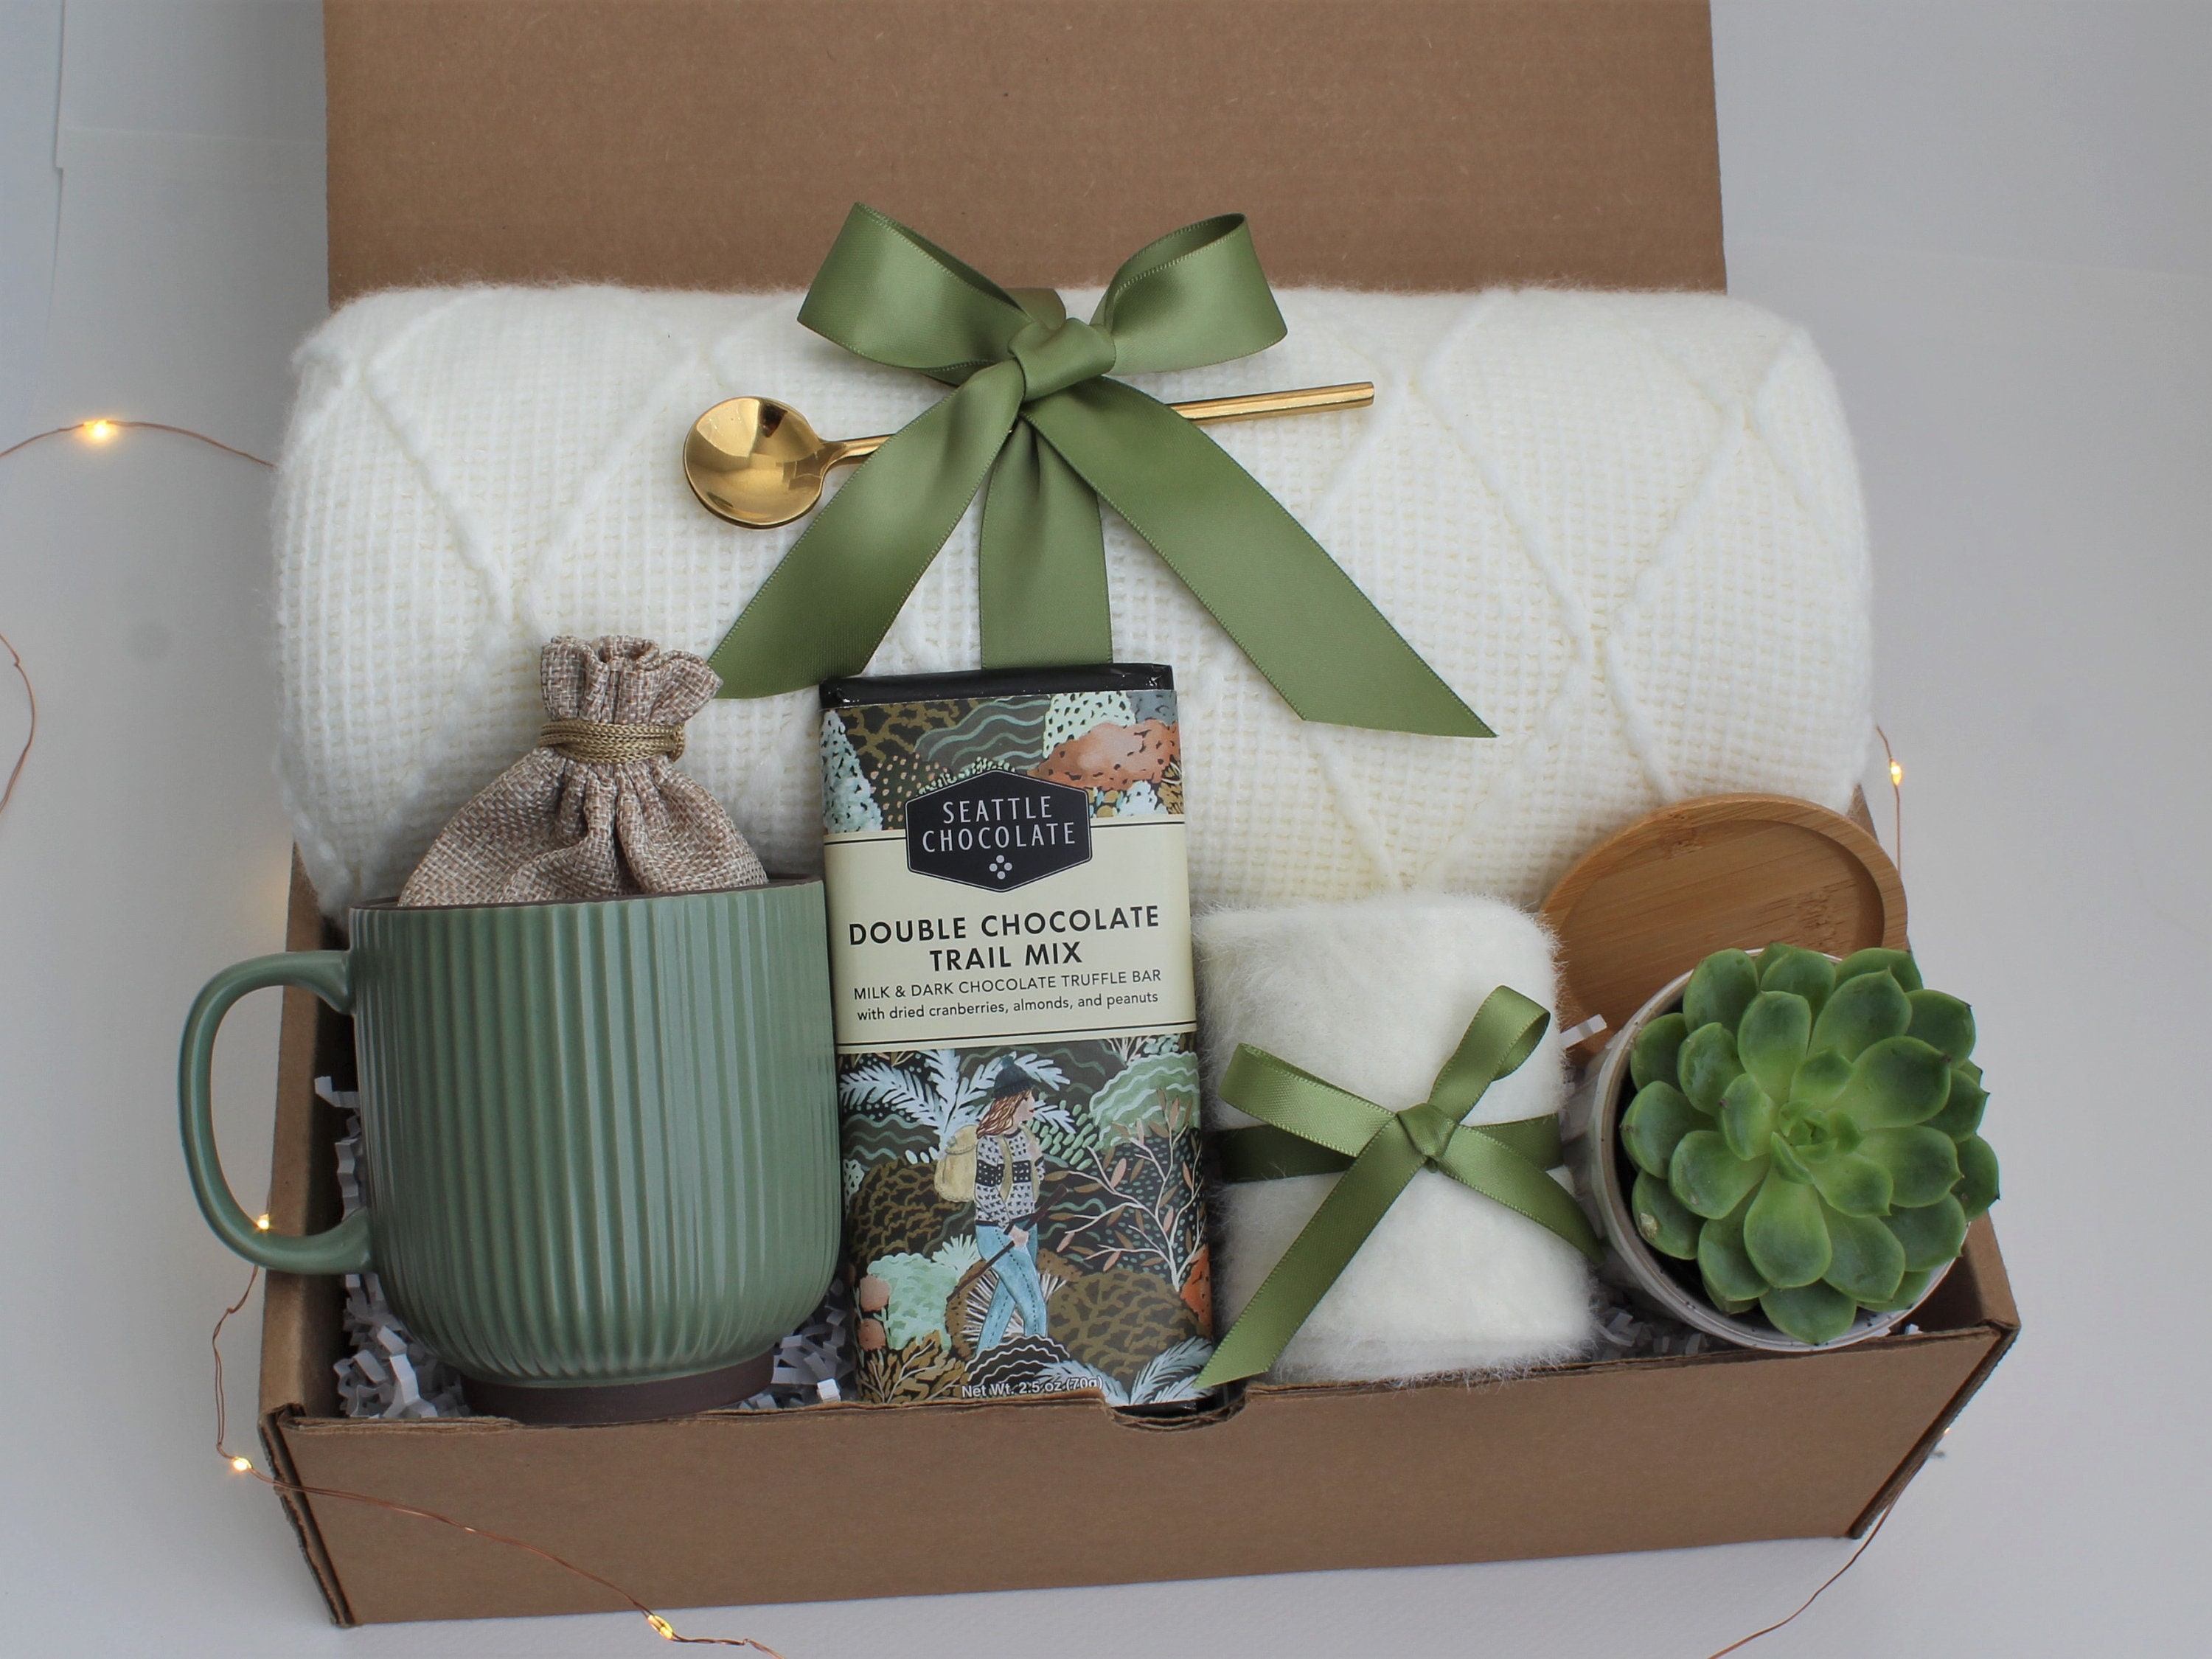 Thank You Gift Basket for Guy, Men, Him - Say Thanks Baskets, Coworker, Work Project - Appreciation | Our Green House